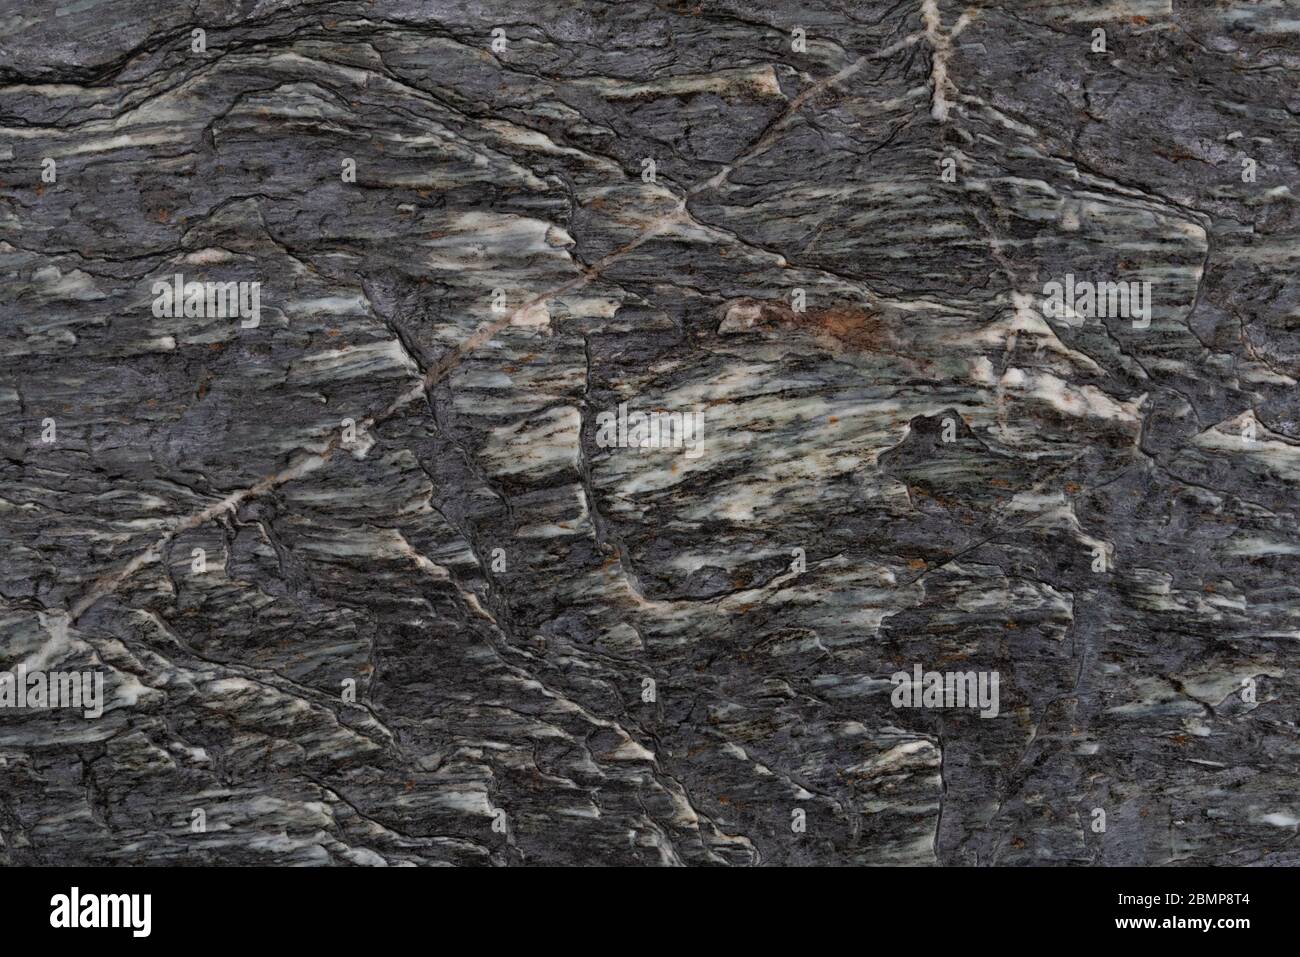 Abstract background of rough textured dark rock surface with white lines and inlay Stock Photo